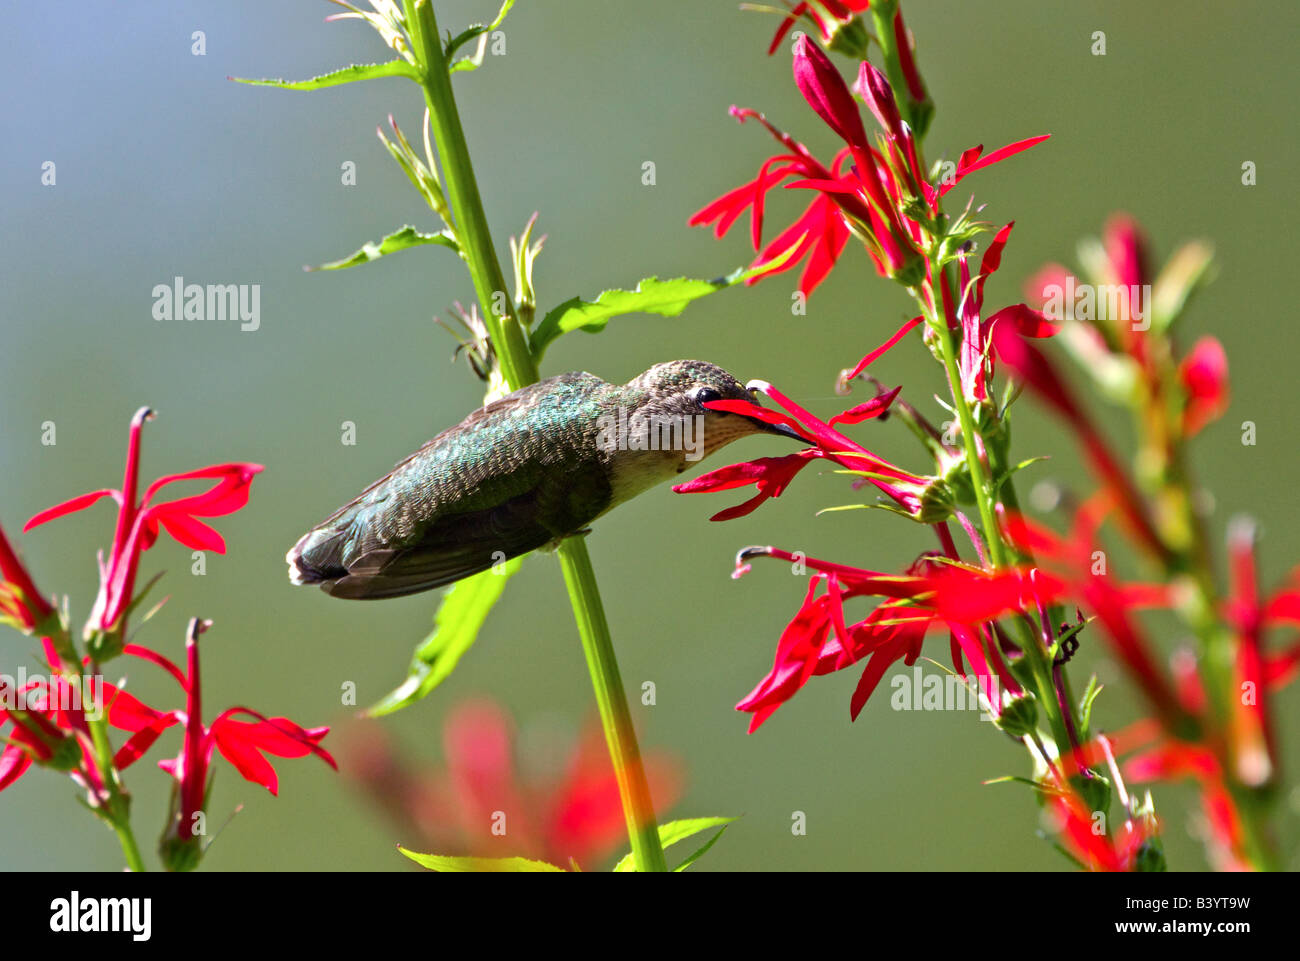 A Ruby-Throated Hummingbird drinking from red Penstemon flowers while perched on a stem. Stock Photo